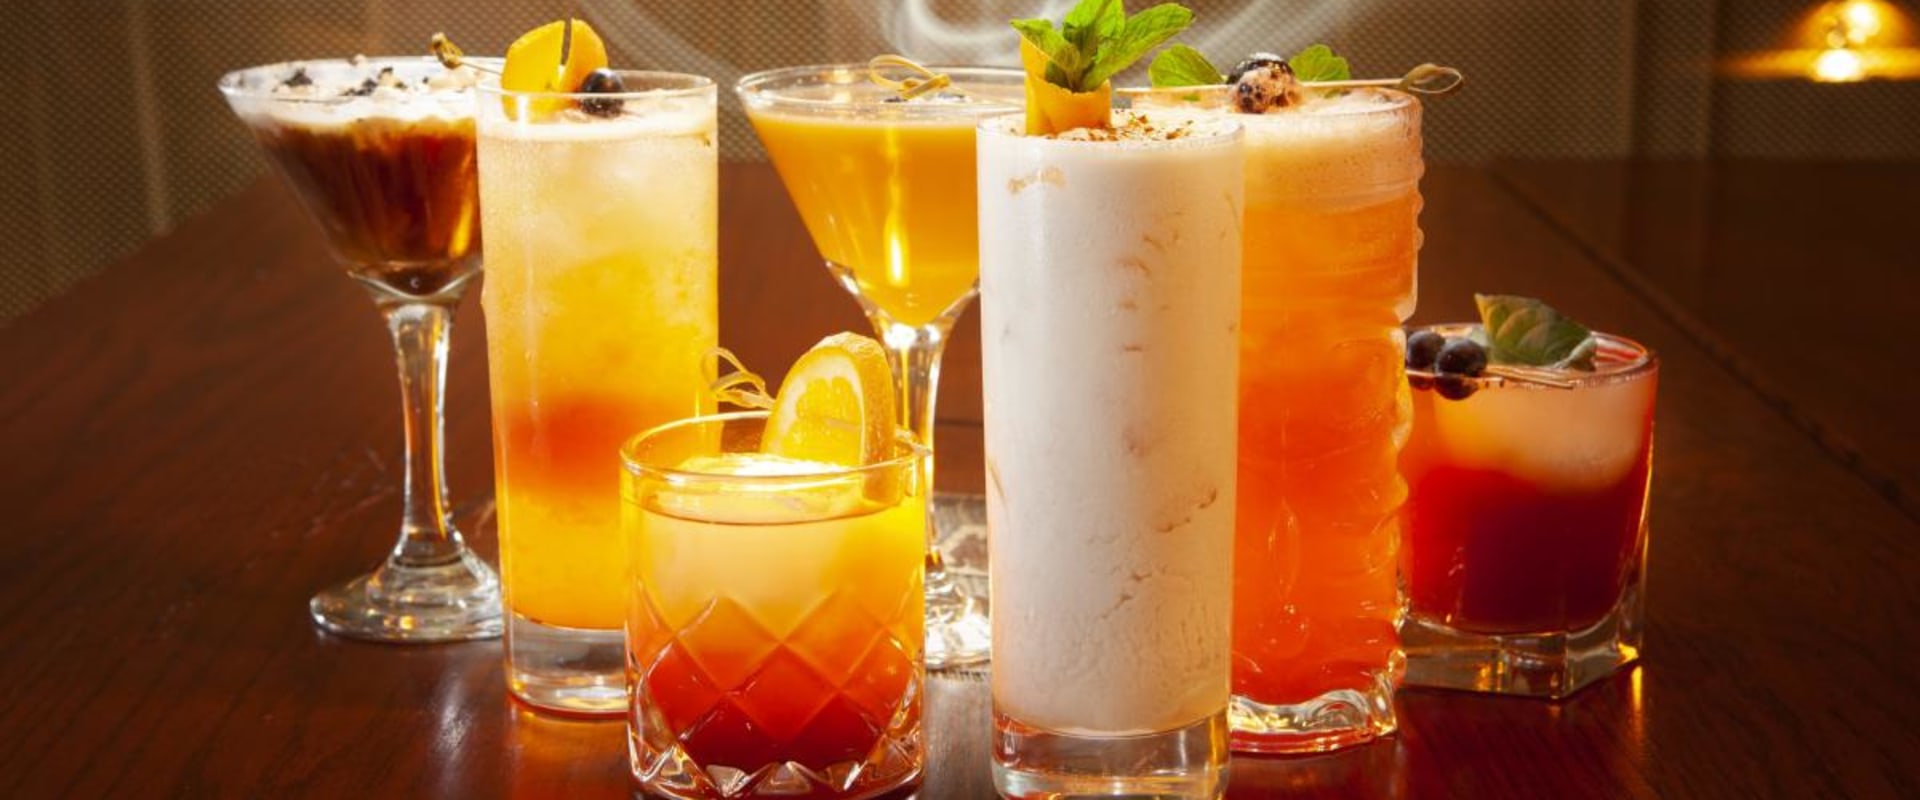 The 10 Best Bars for Unbeatable Happy Hour Specials in Scottsdale AZ